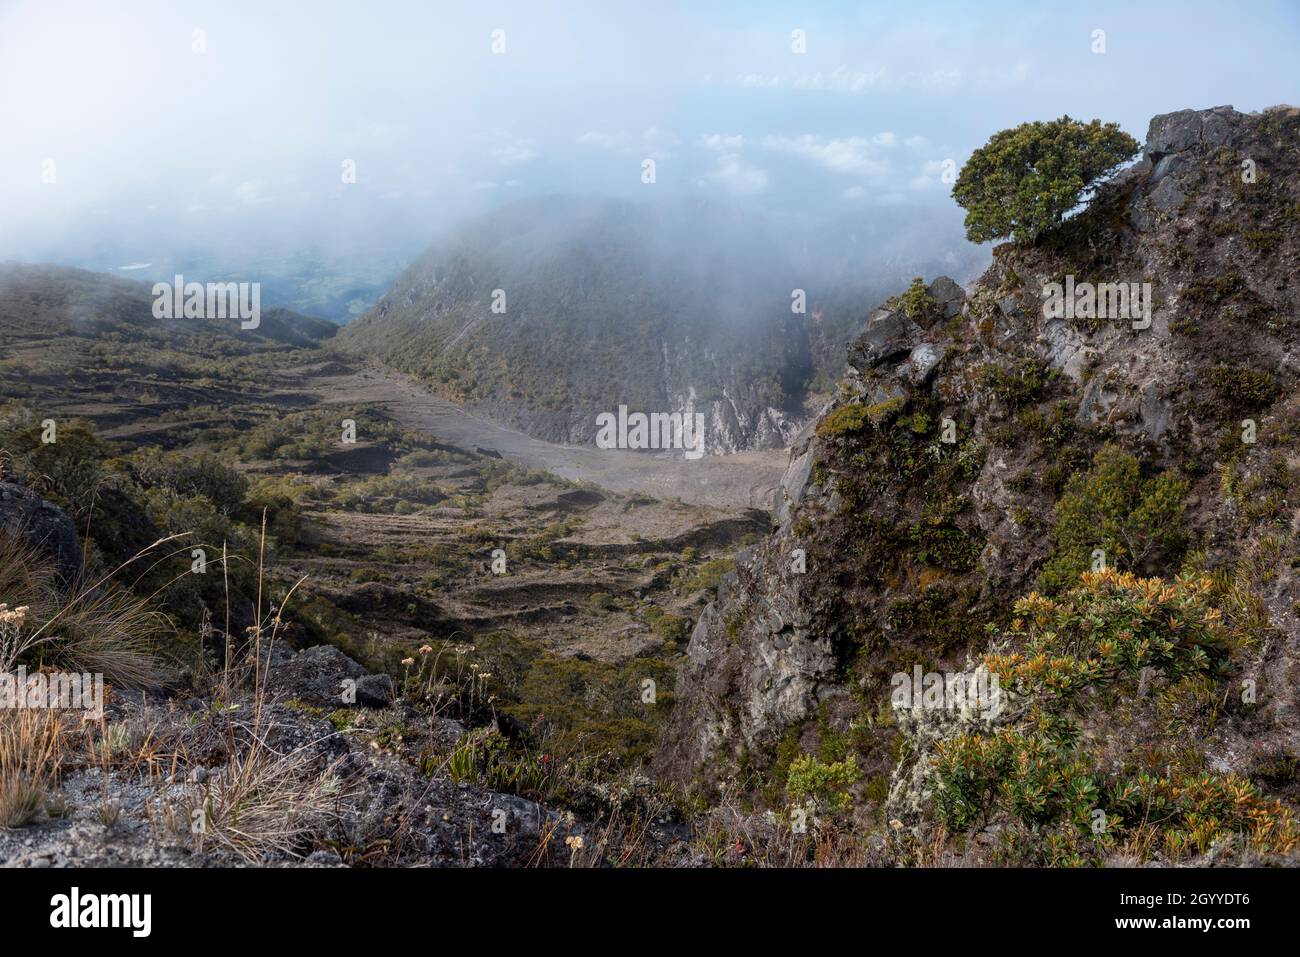 Volcan Baru National Park, the highest point in Panama ( 3475m), Chiriqui highlands, Panama, Central America Stock Photo